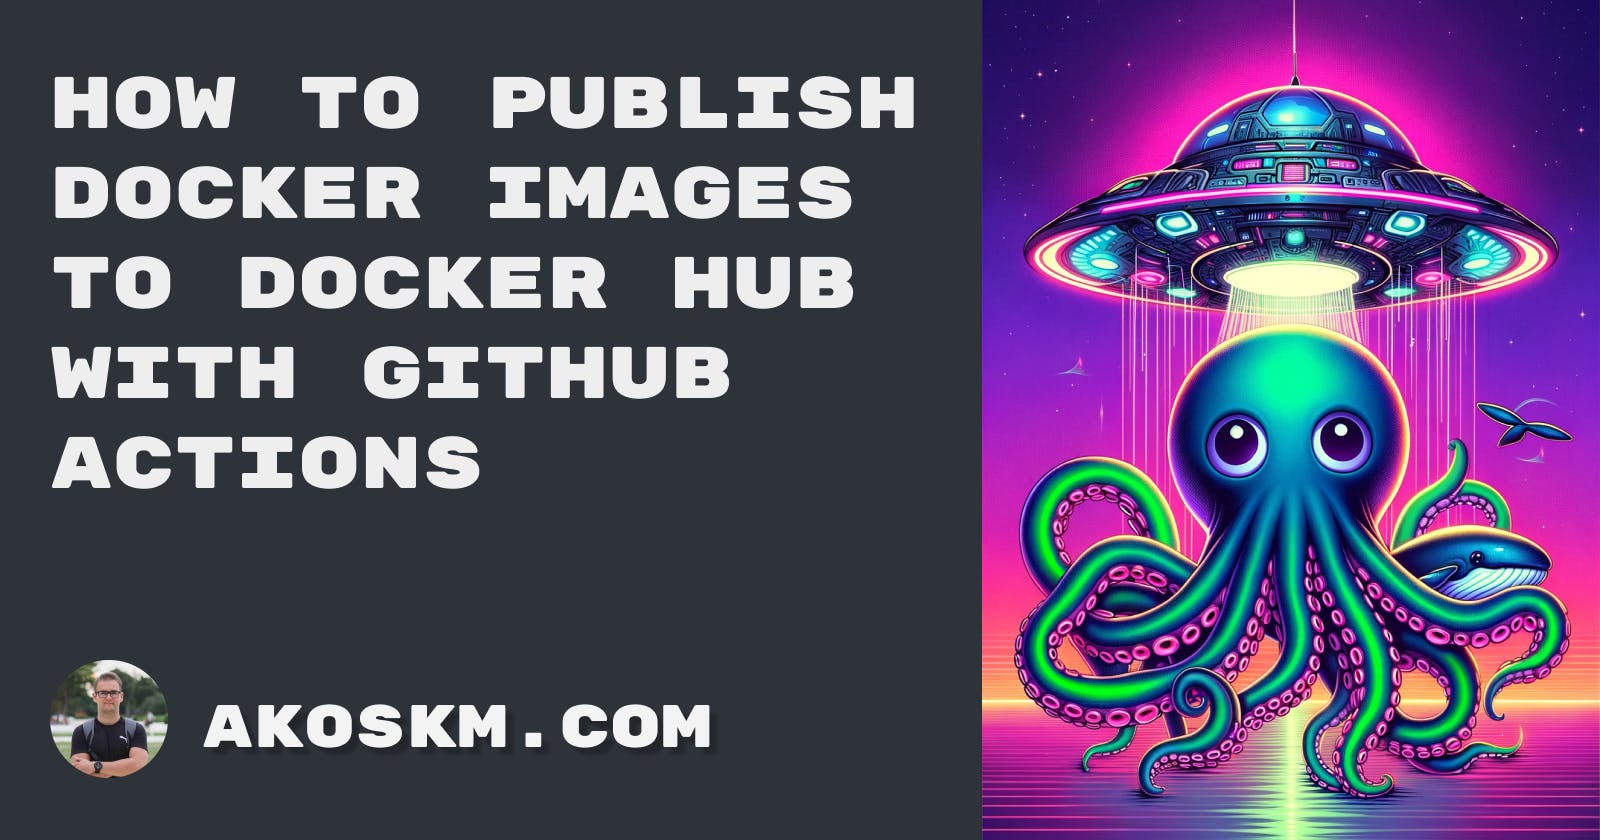 How to Publish Docker Images to Docker Hub with GitHub Actions